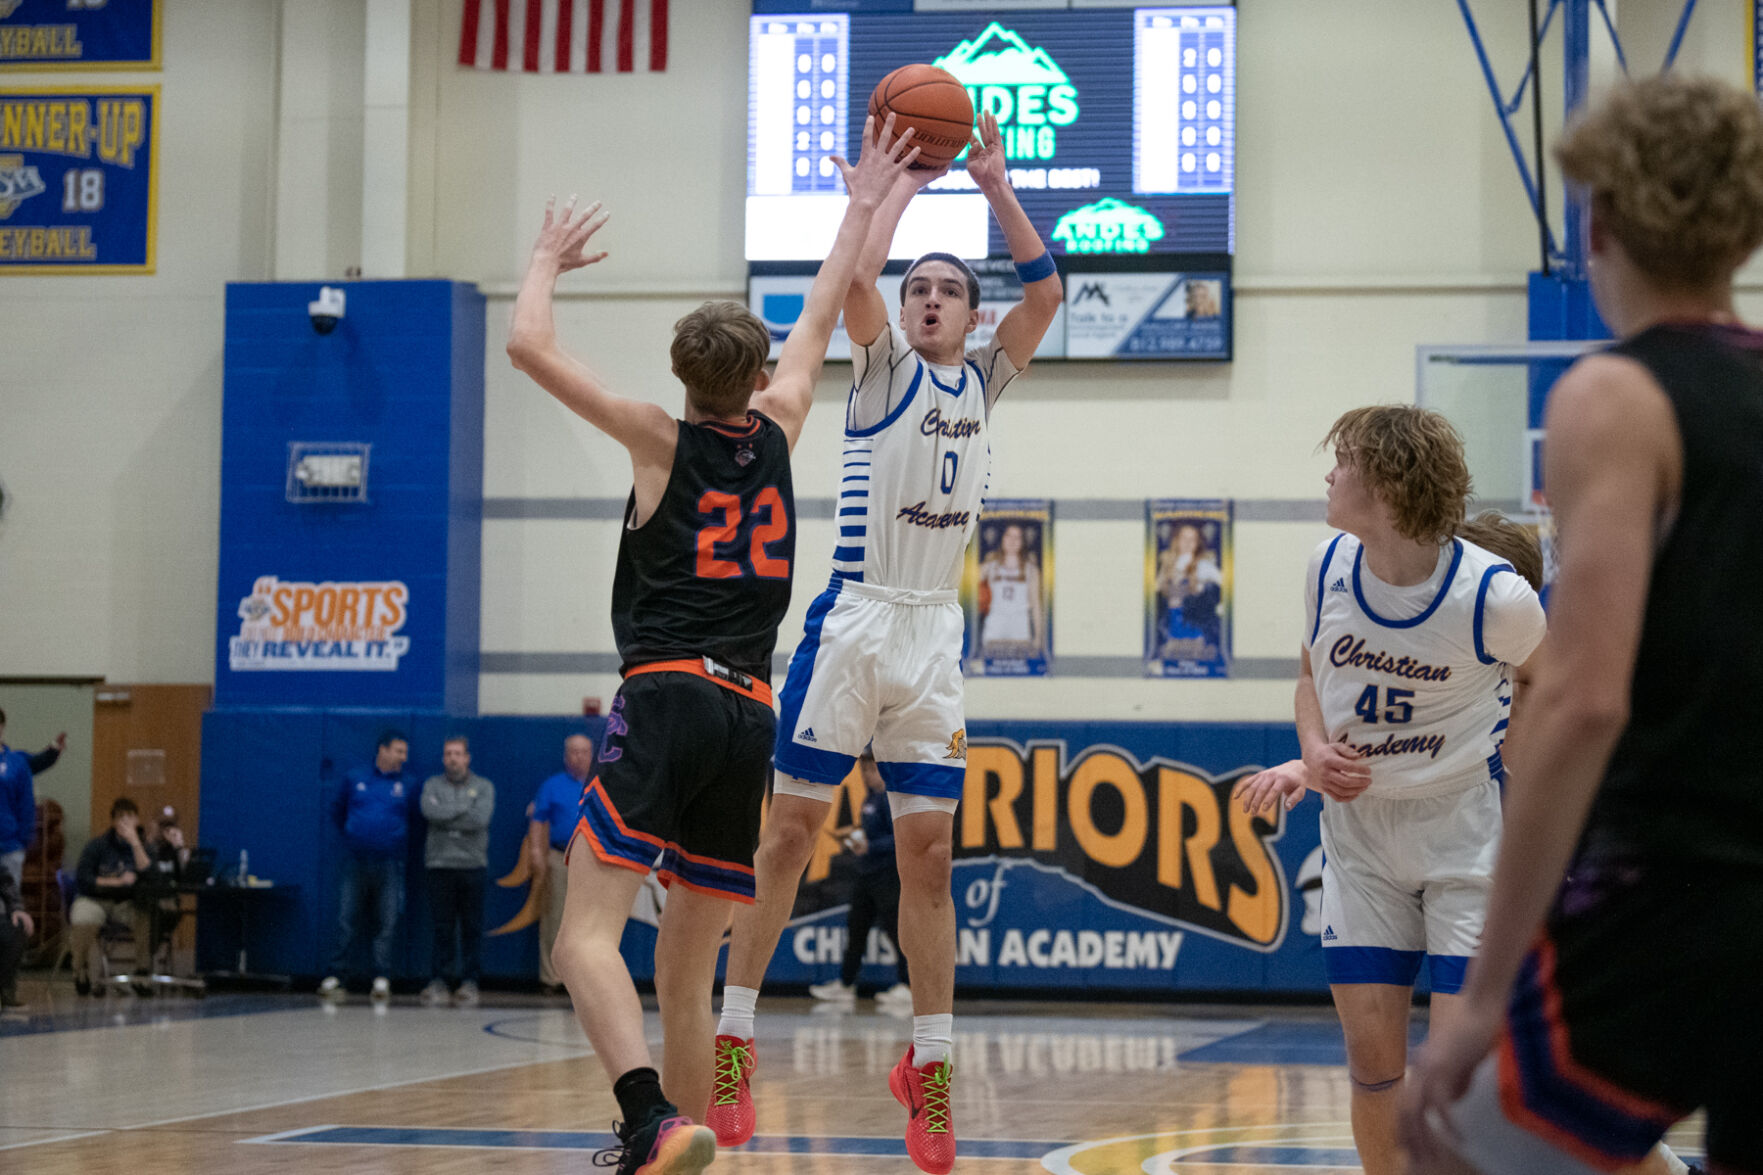 BOYS’ BASKETBALL: Christian Academy up to No. 3 in Class A poll